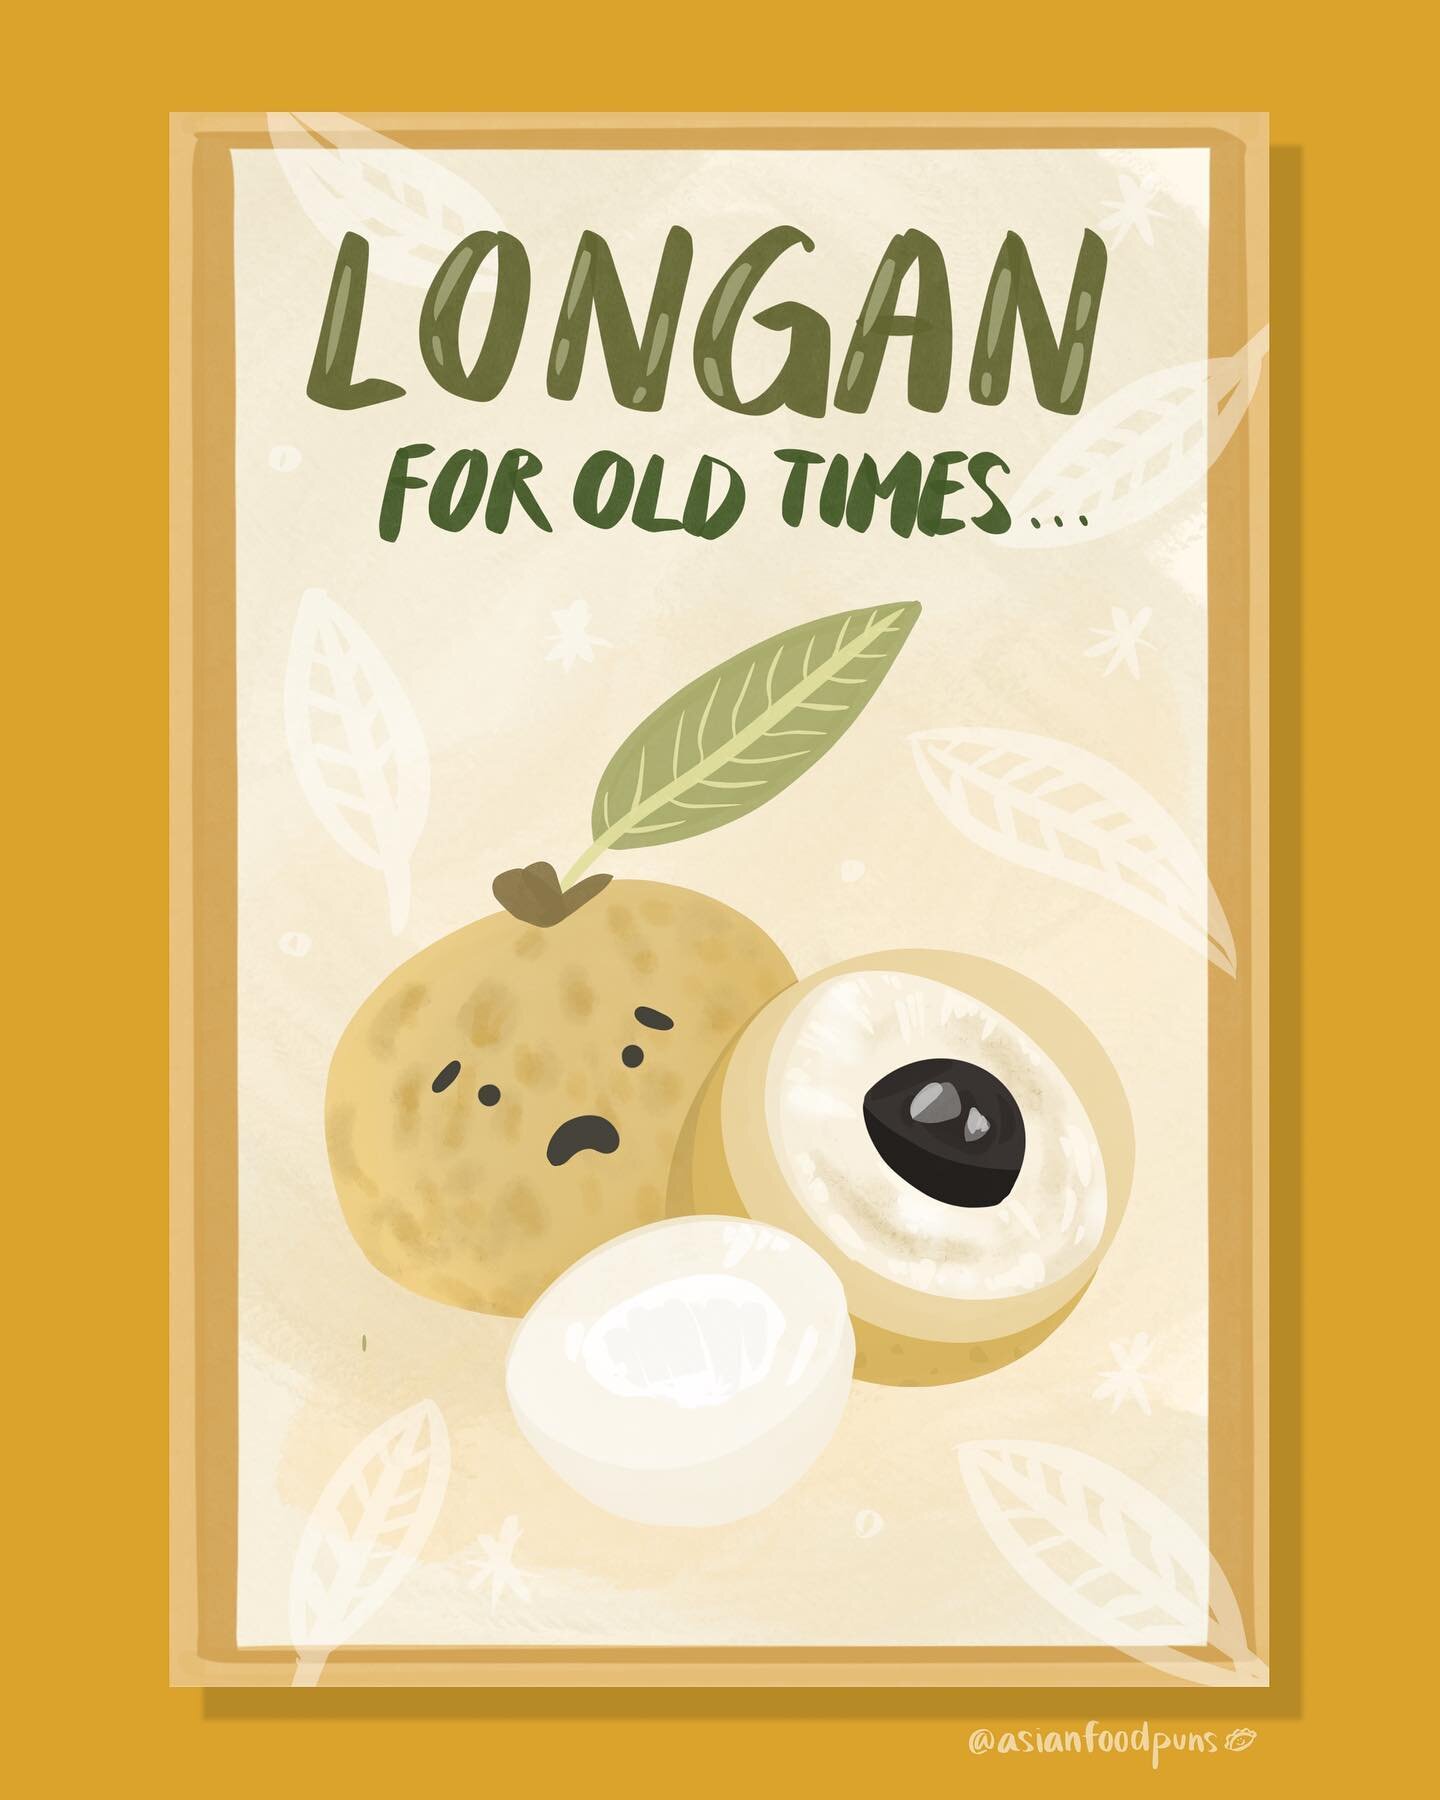 Tbh this pretty much sums up my mood all of 2020 😬
⠀
Also, longan is apparently 龙眼 in Chinese, which means dragon eye. It kind of similar to lychee or rambutan! According to Wikipedia, it is near threatened right now... just some random facts for yo